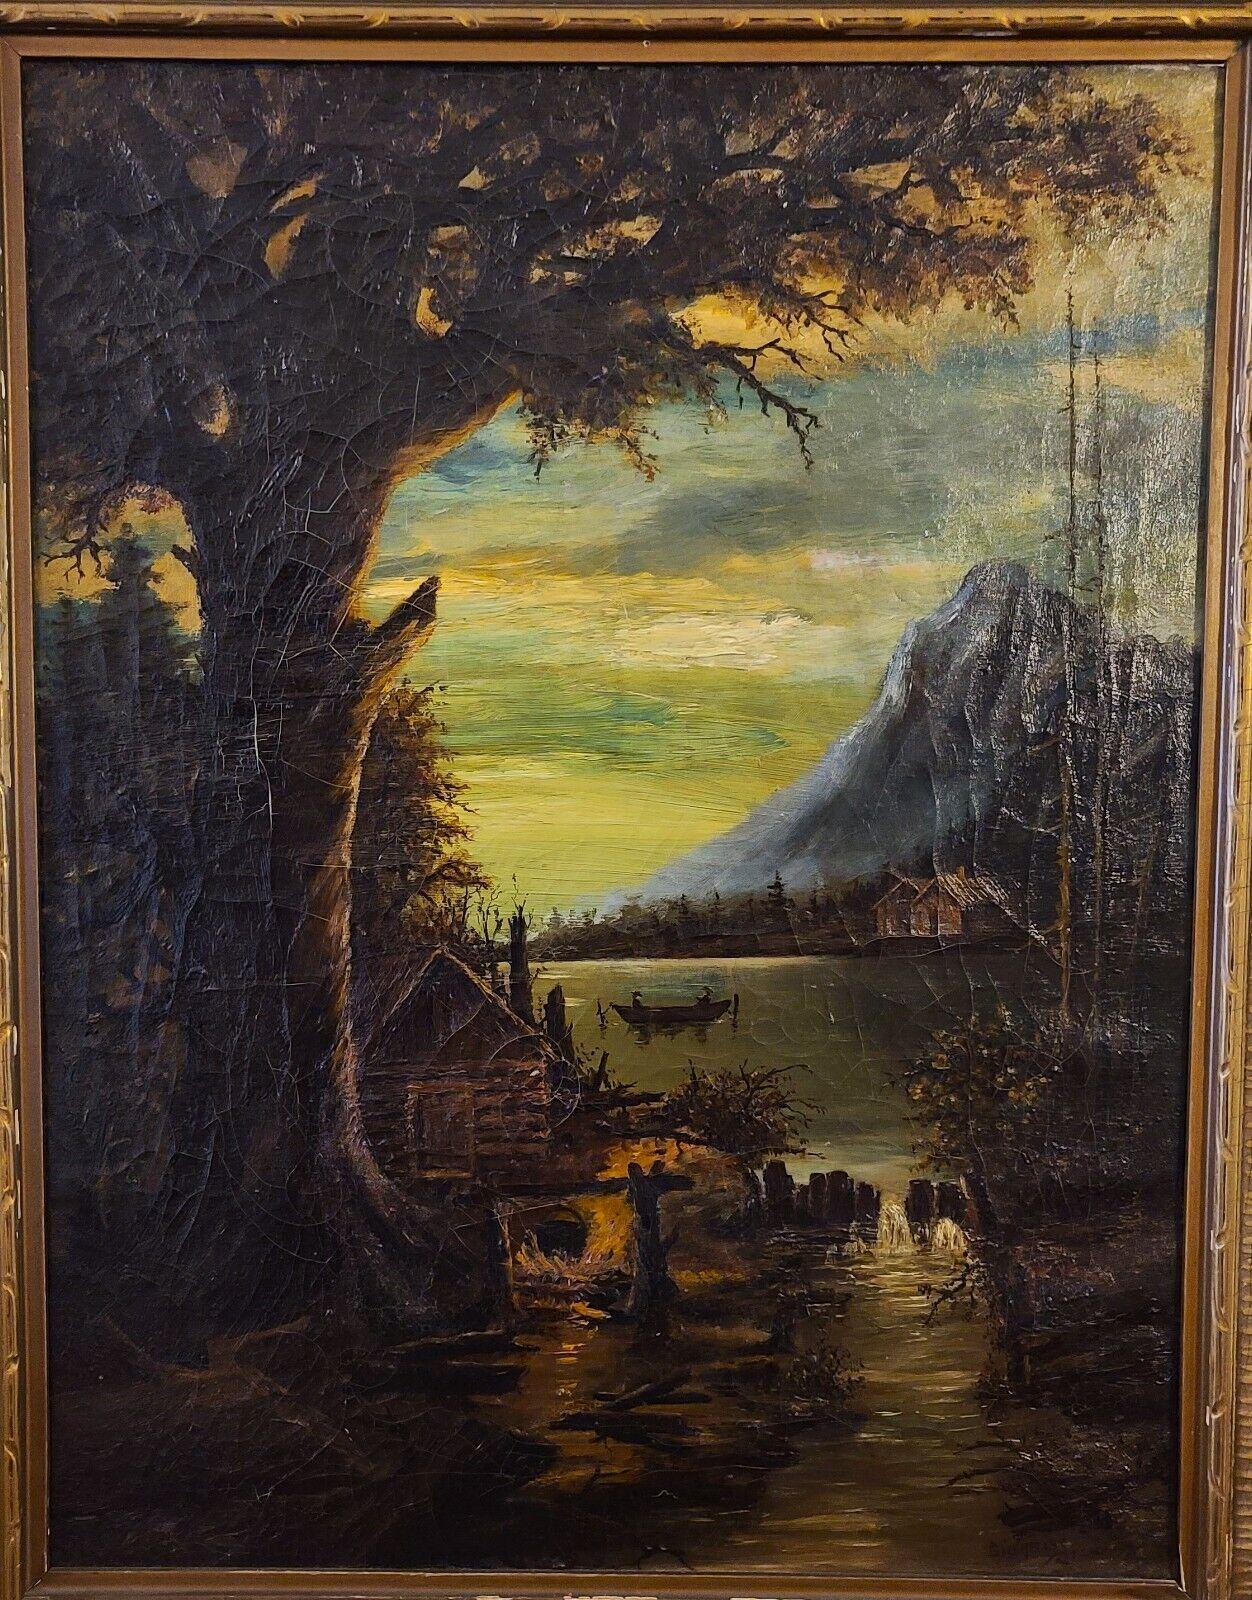 Offering one of our recent palm beach estate fine art acquisitions of a
antique landscape oil painting on canvas signed Gilchrist 1921.

Approximate measurements
Canvas: 26